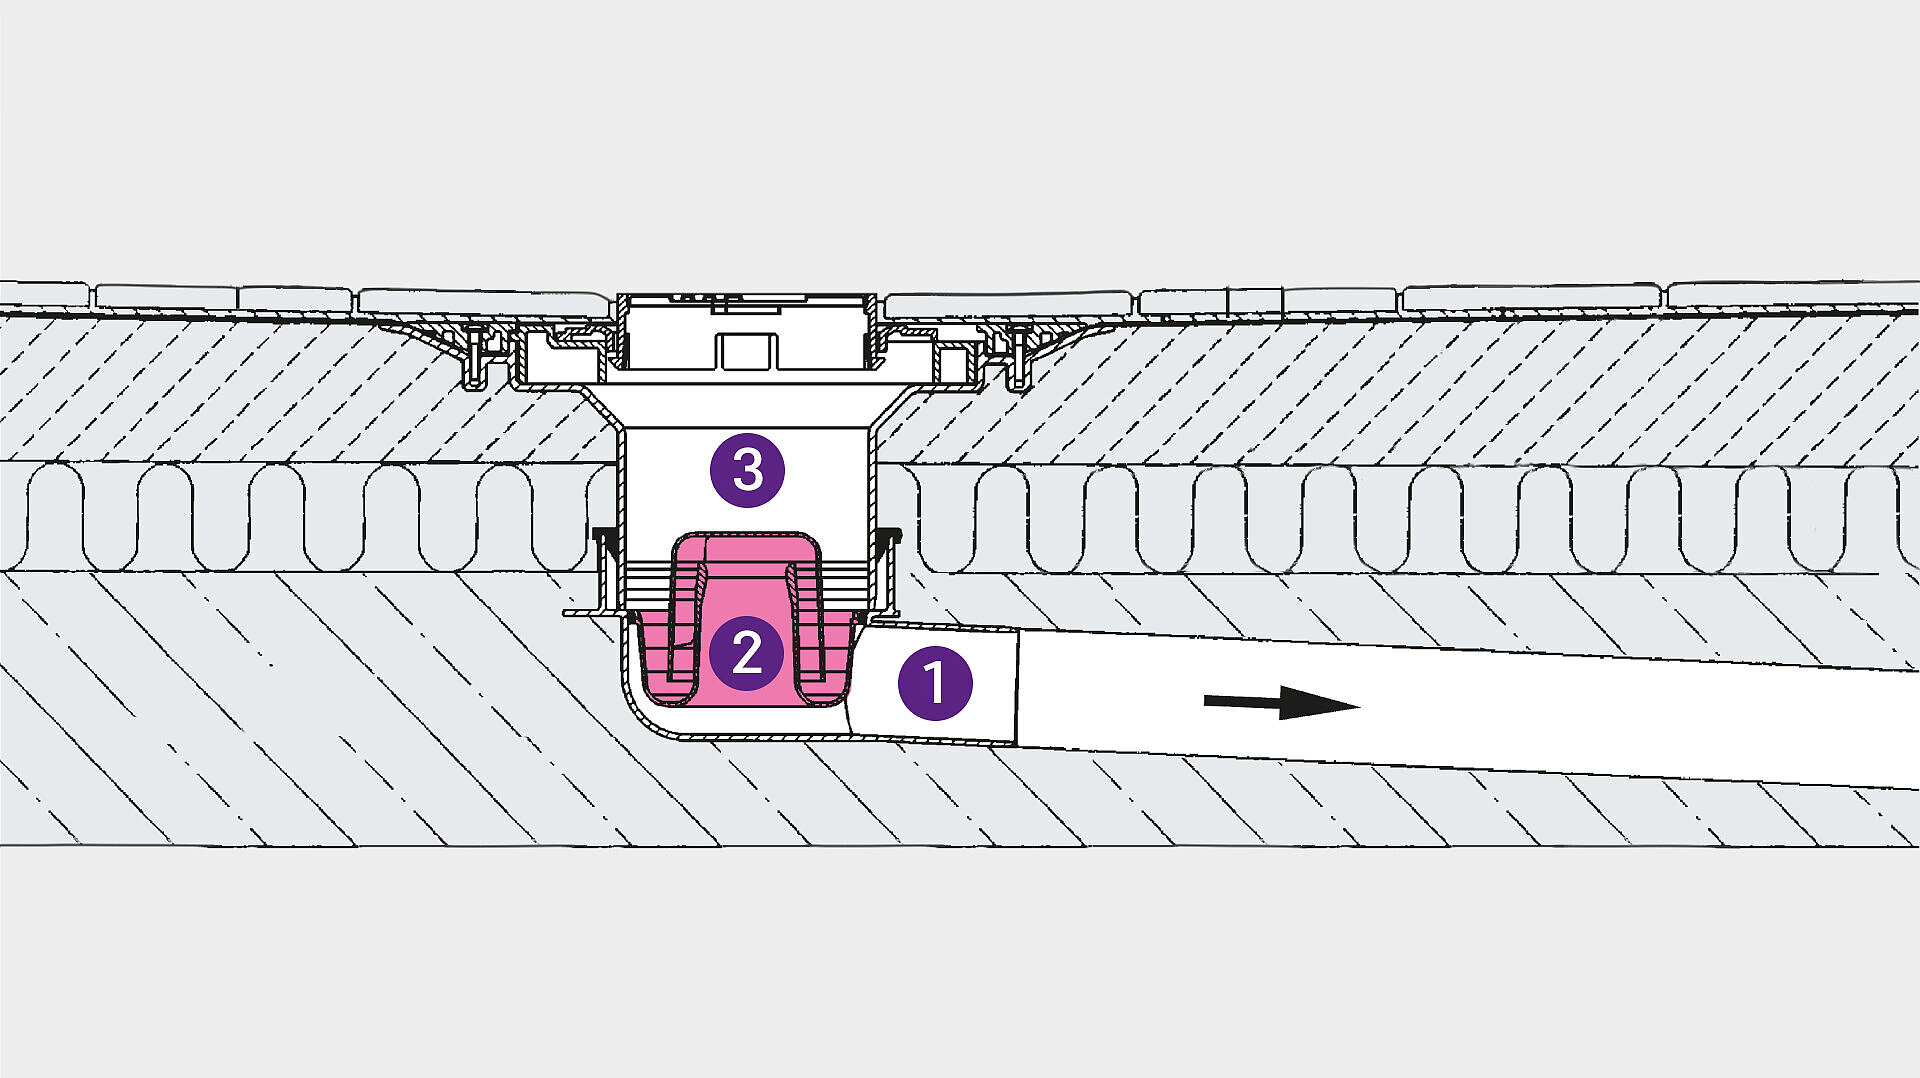 Shallow bed waterproofing layer installation diagram